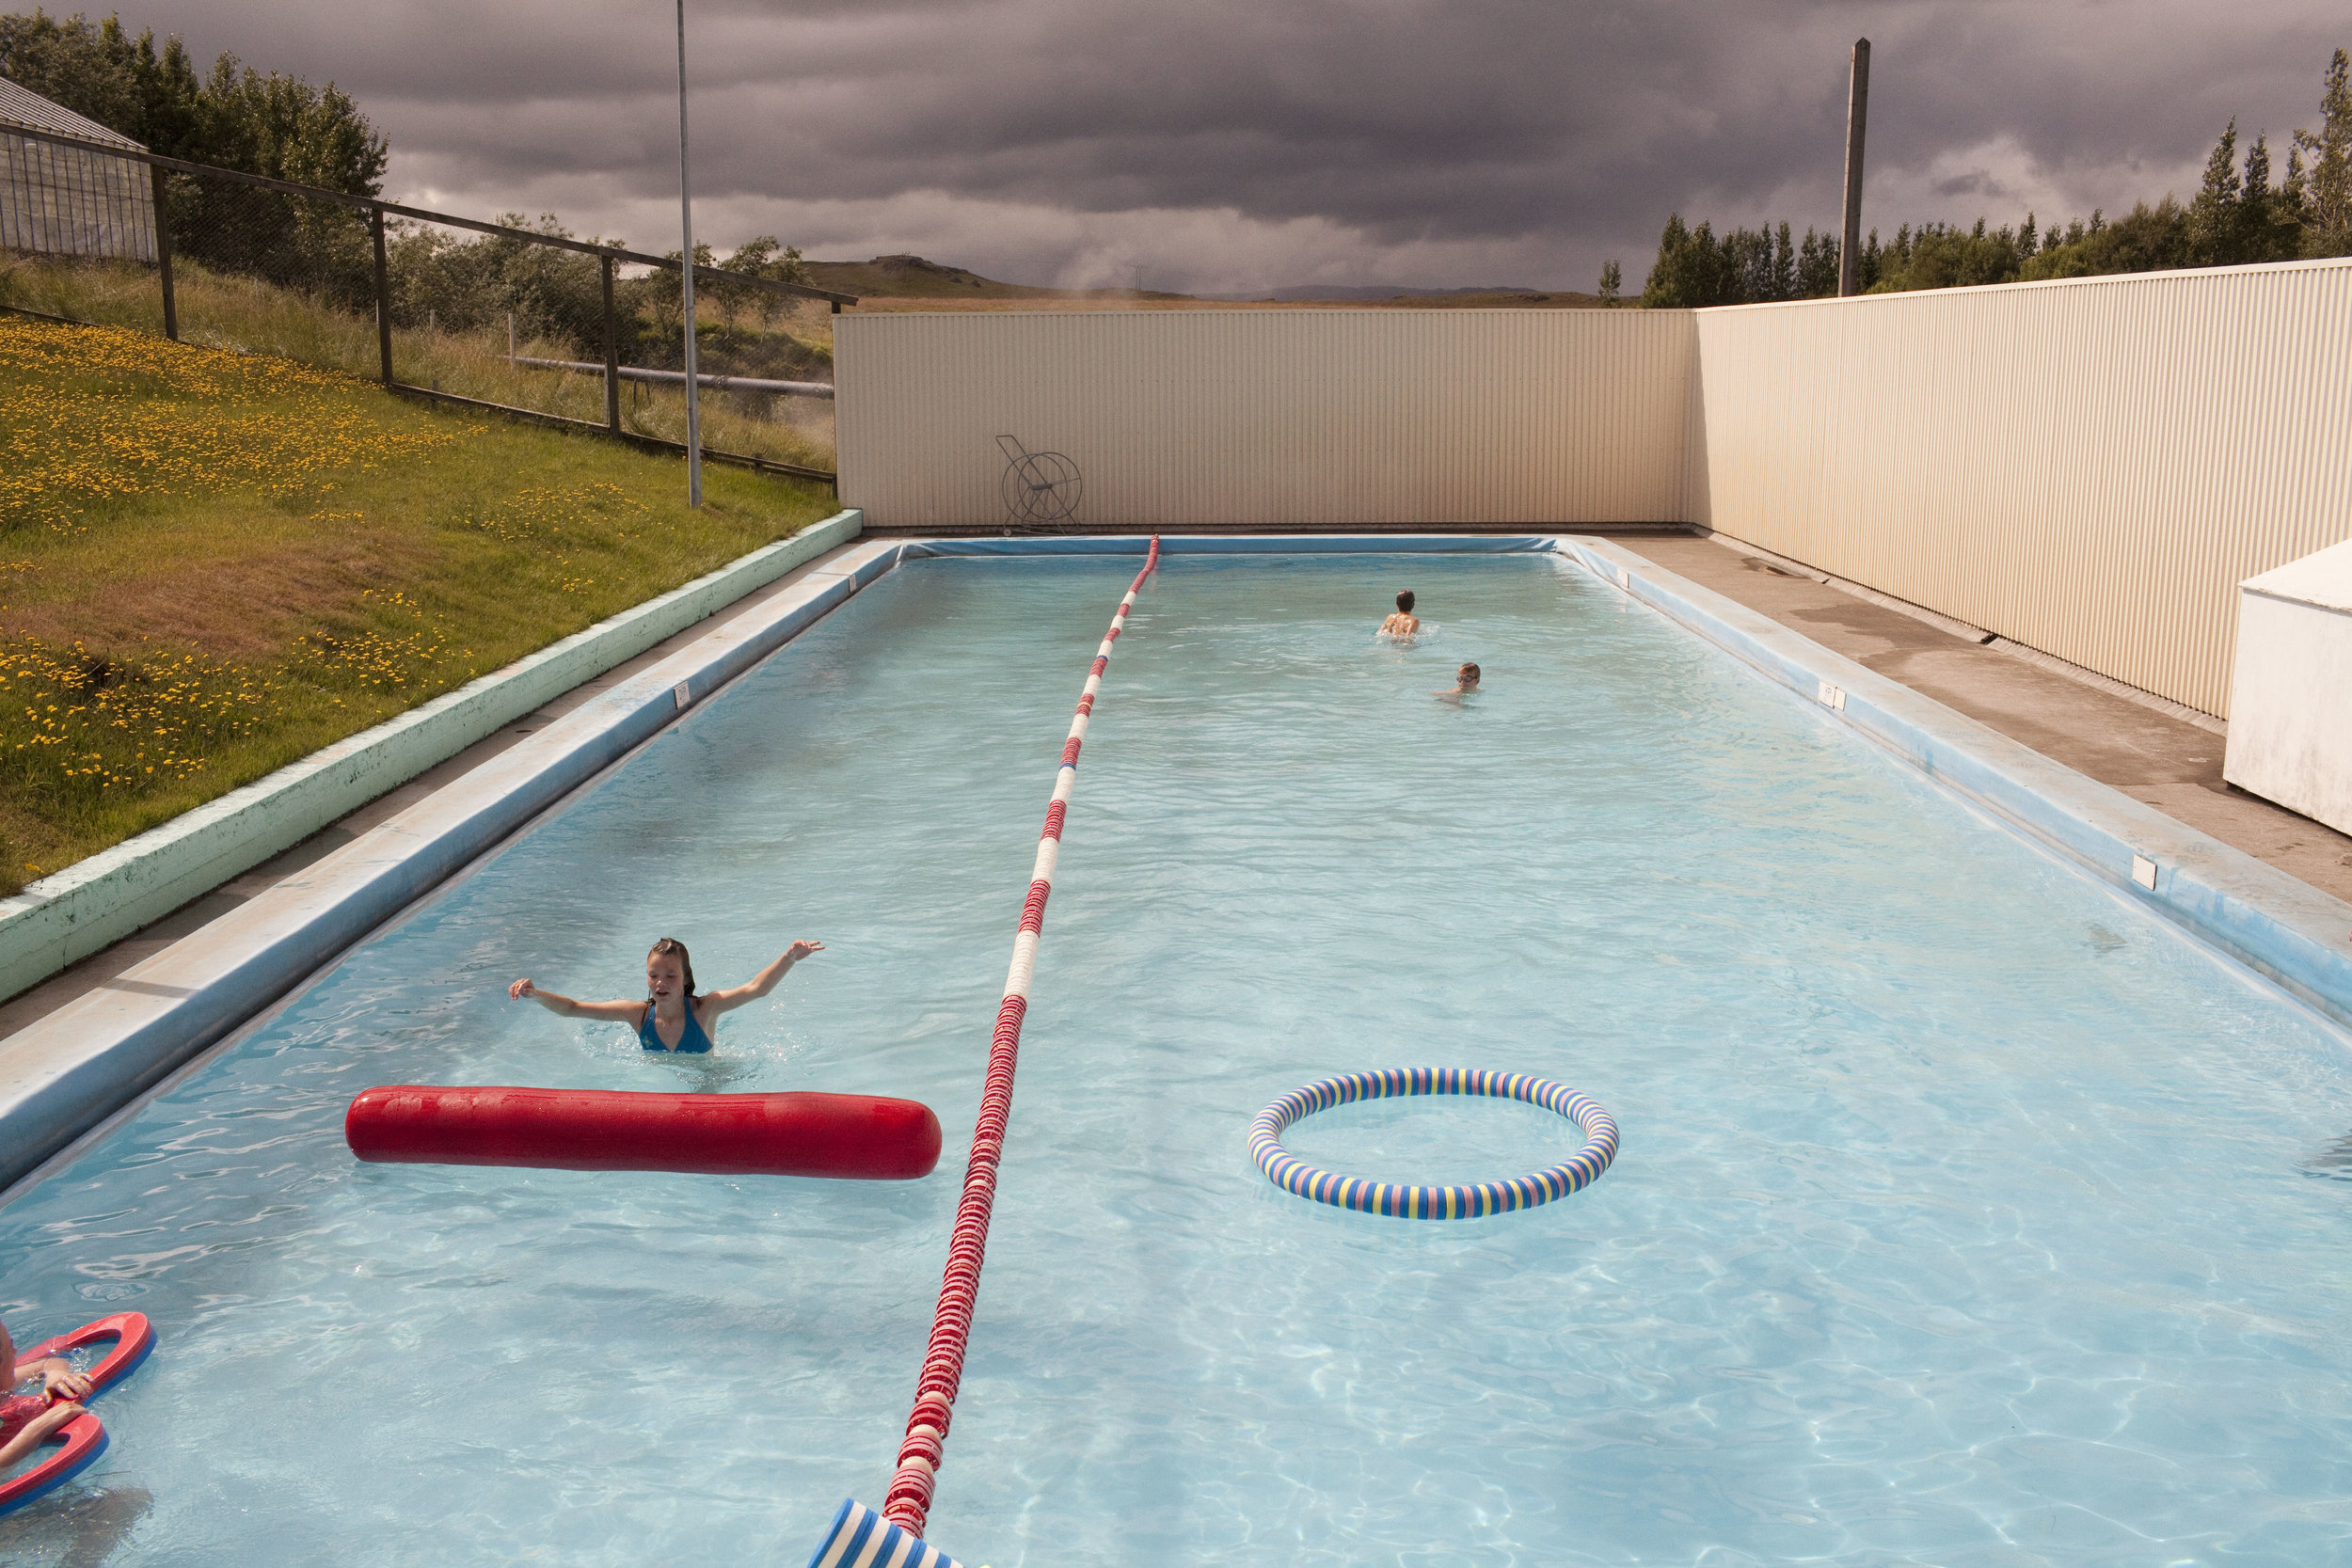  At the community pool in Fludir, Iceland. The small town of about 400 people is situated in the mountains and its scenery makes it a popular vacation spot for many Icelanders in the summer months. 